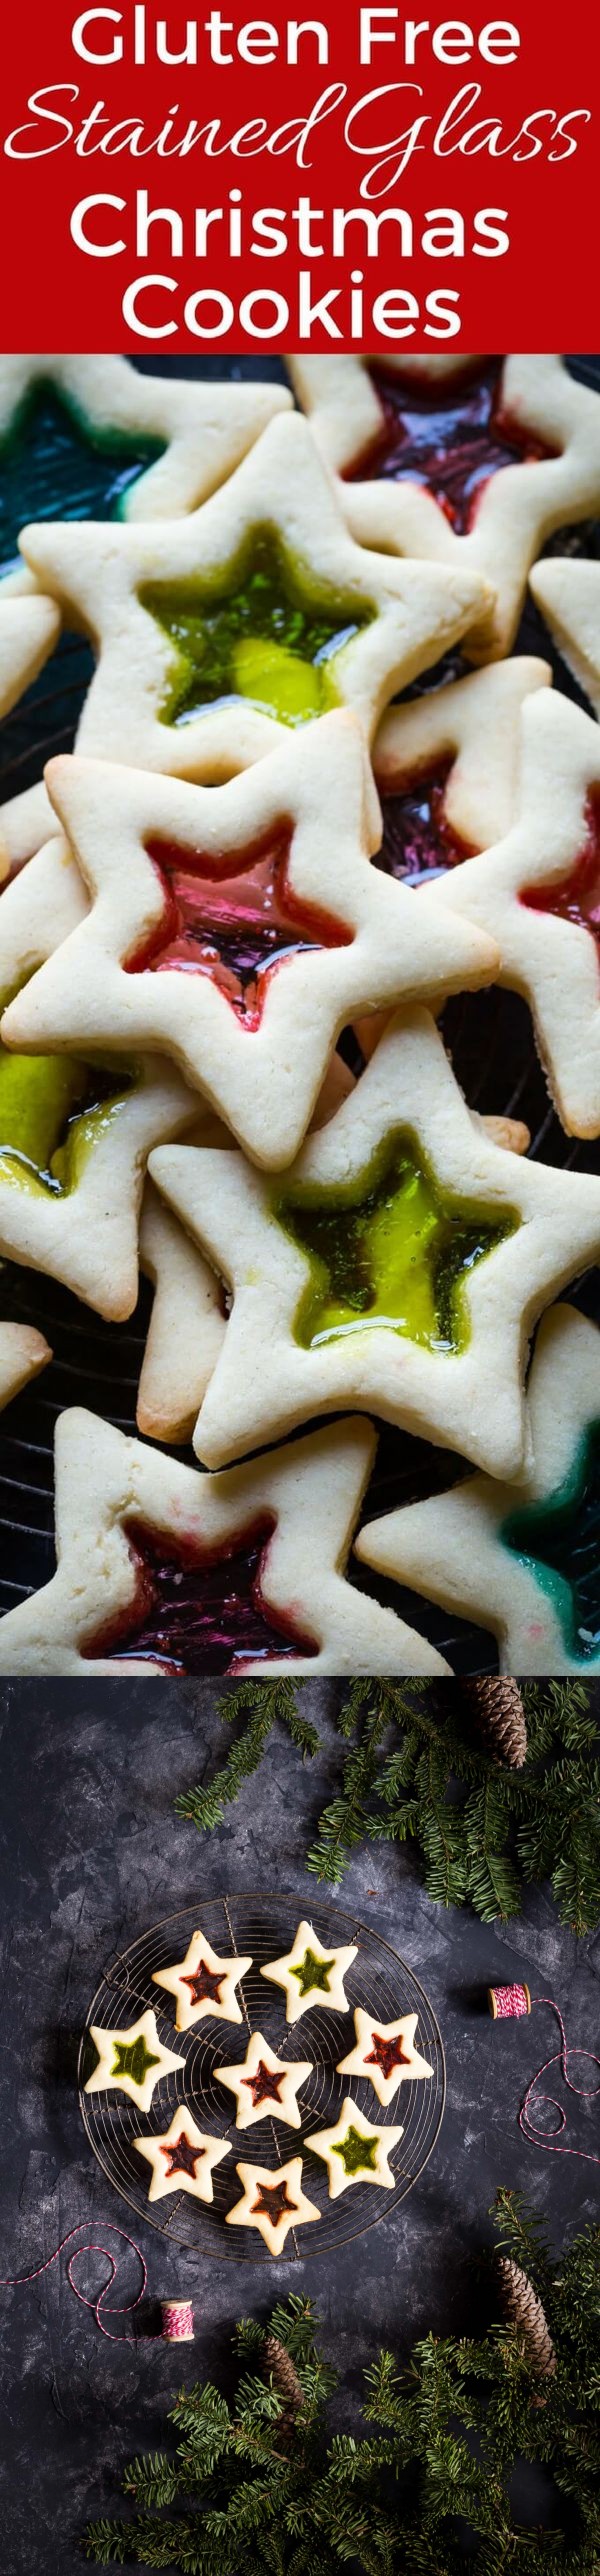 Gluten Free Stained Glass Cookies